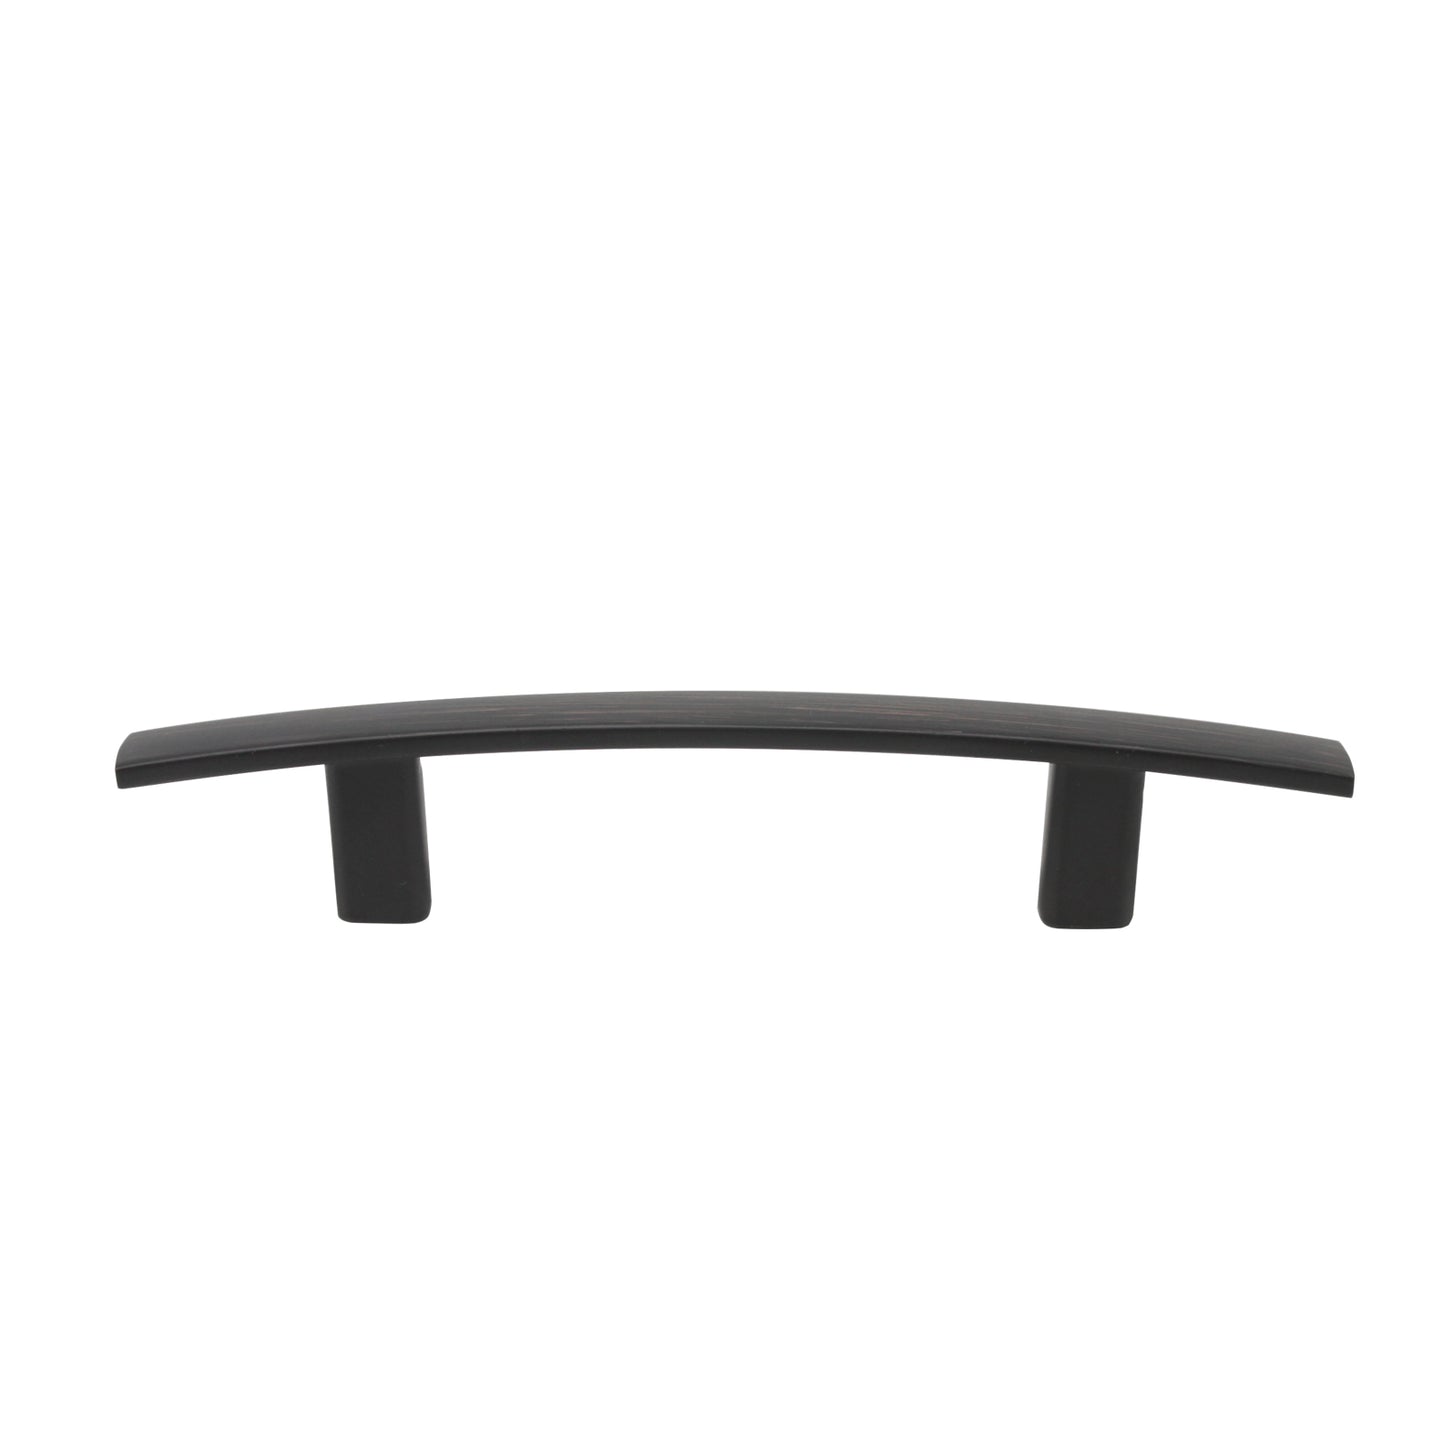 Curved Subtle Arch Cabinet Handles 3inch 76mm Hole Centers Oil Rubbed Bronze Finish PD81670ORB76 - Probrico